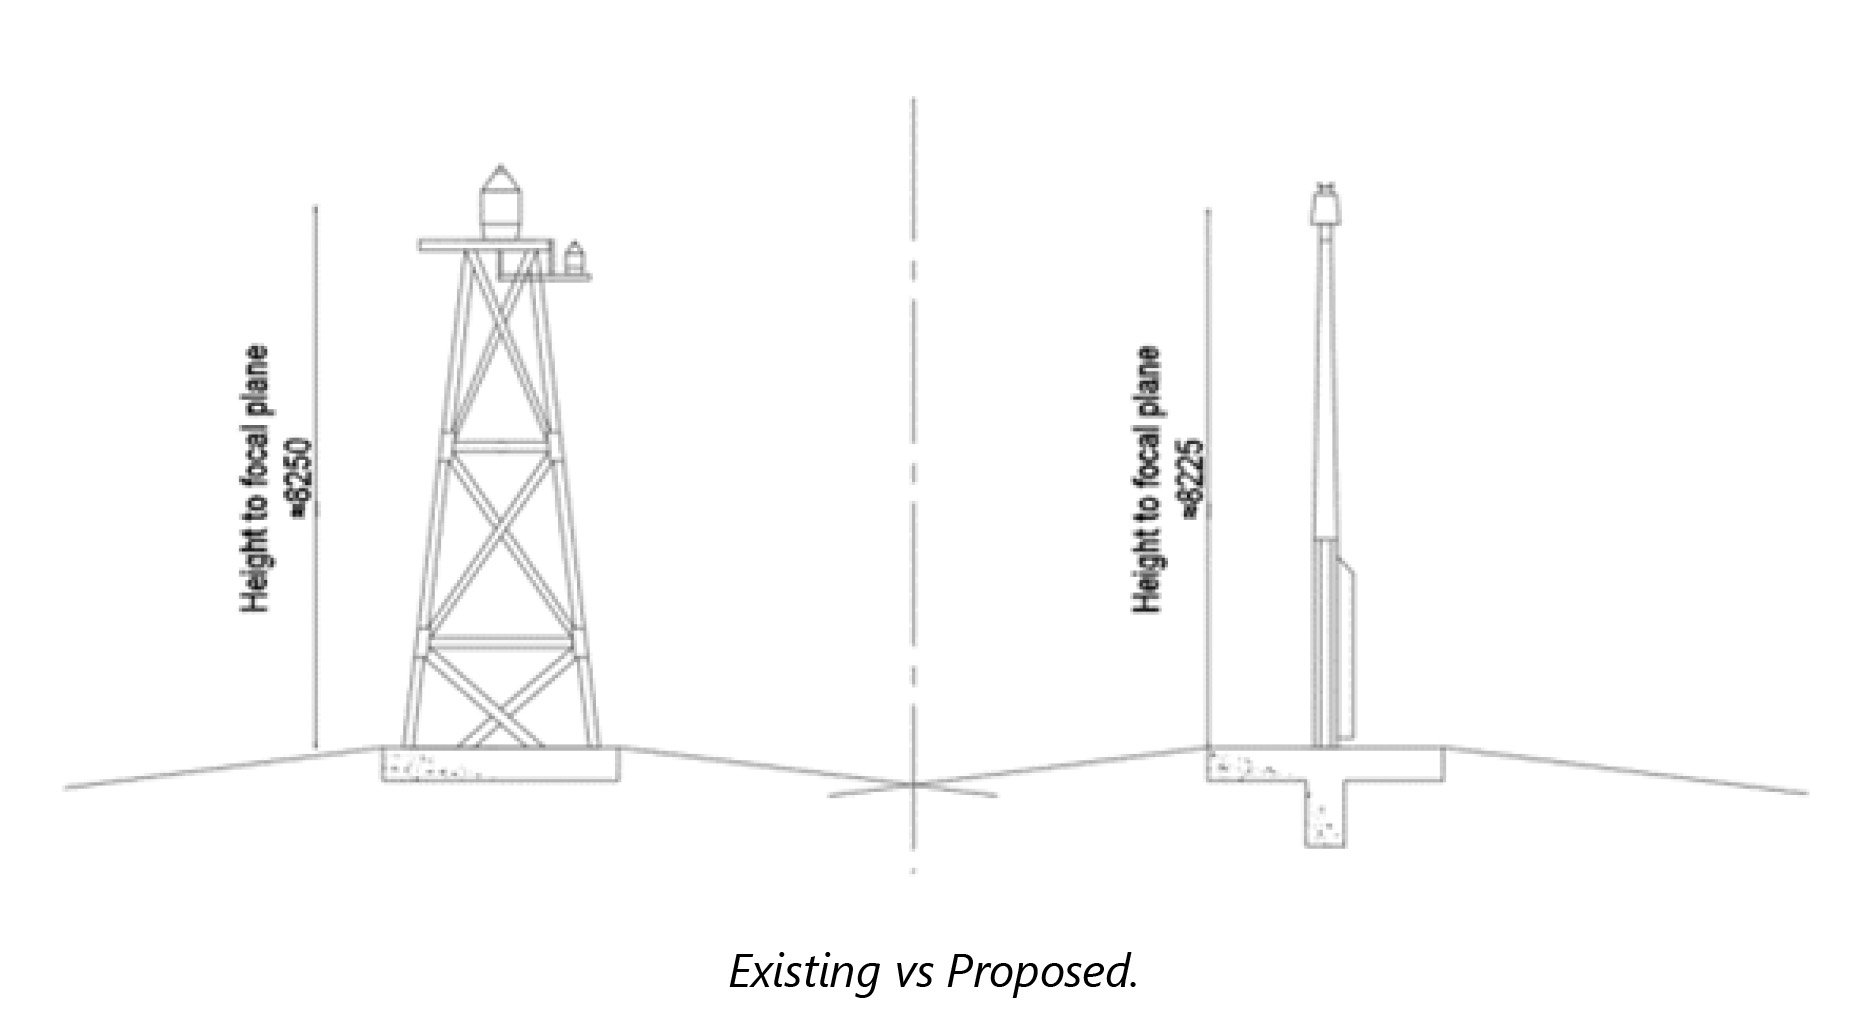 Schematic showing the current and proposed lighthouse designs.